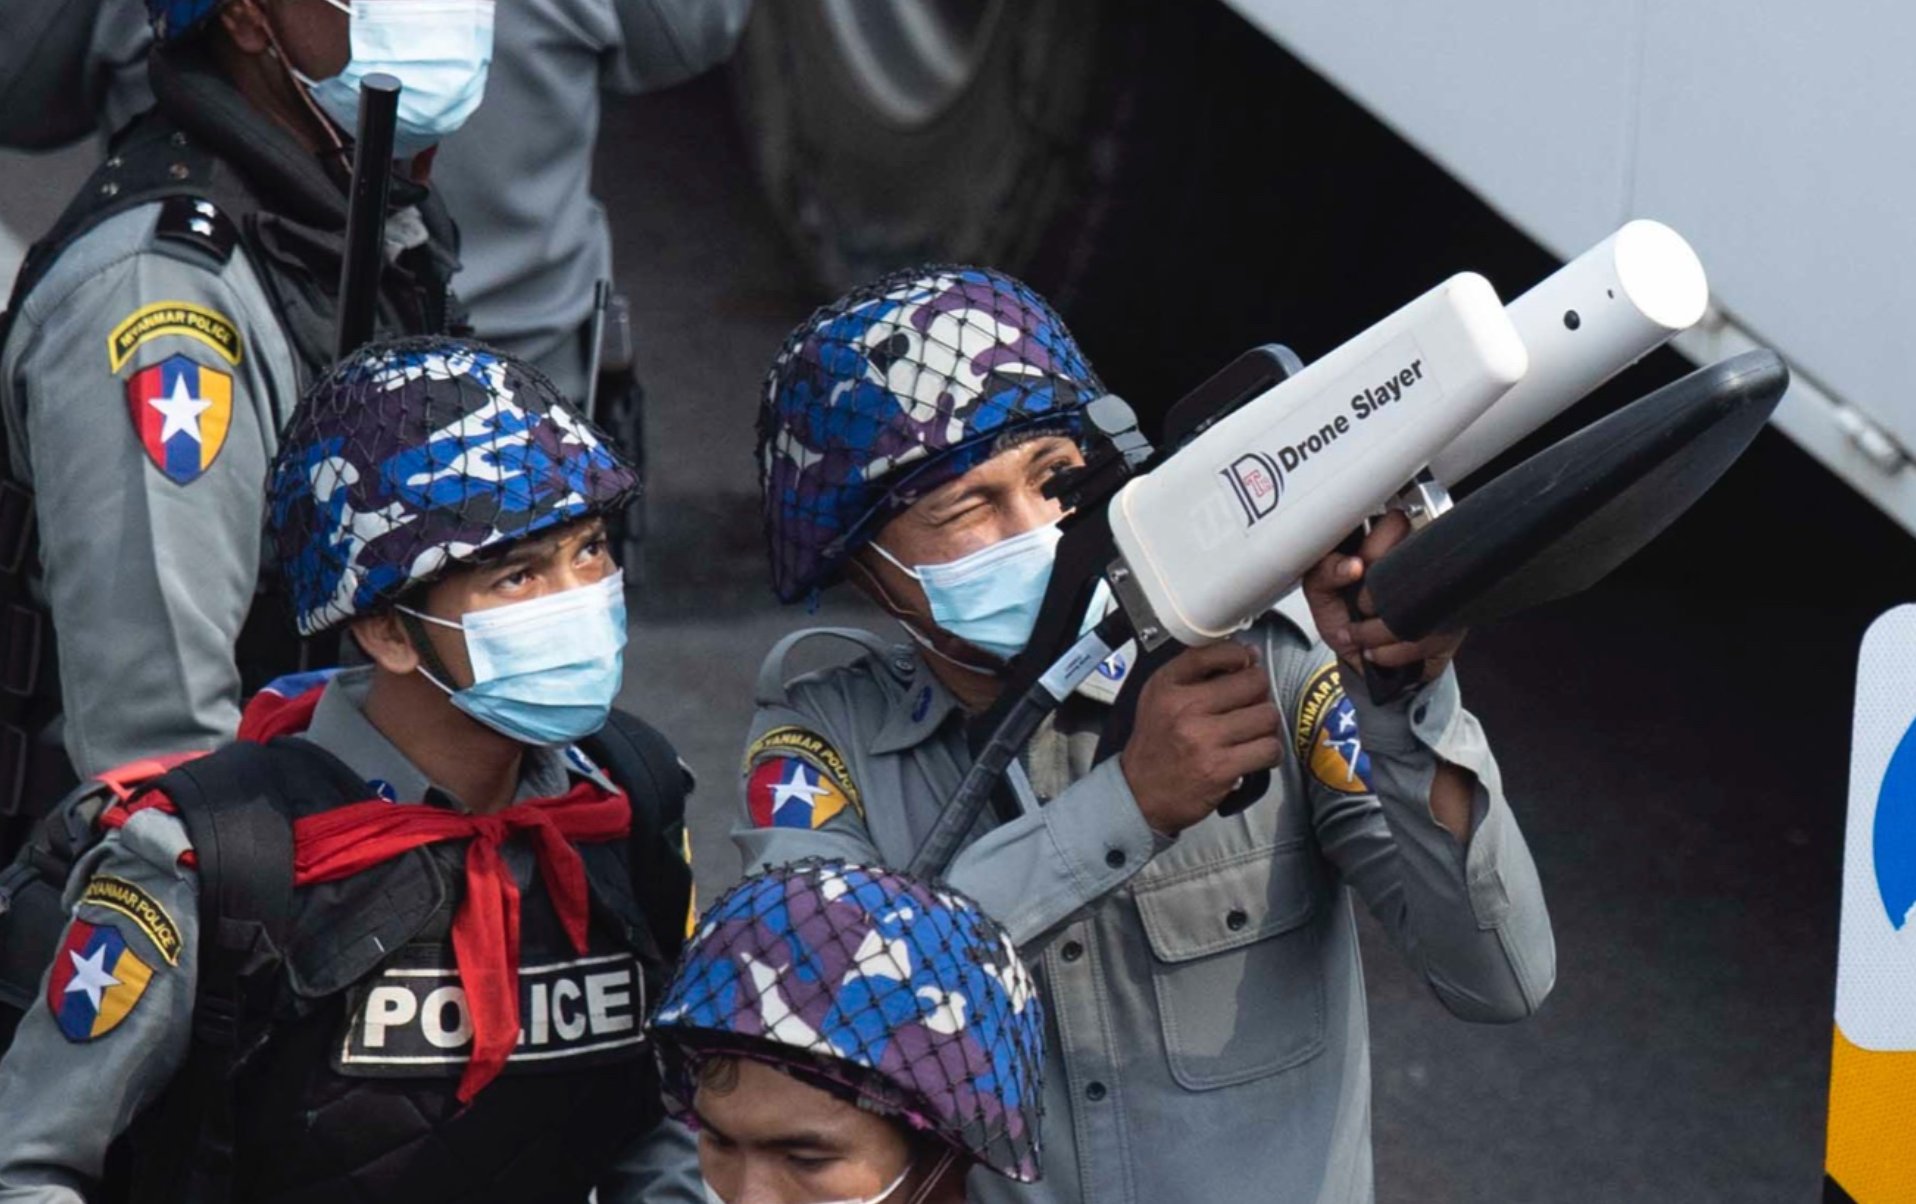 Myanmar police officers aim an anti-drone gun supplied by TRD Singapore. Photo: Justice For Myanmar/Twitter
